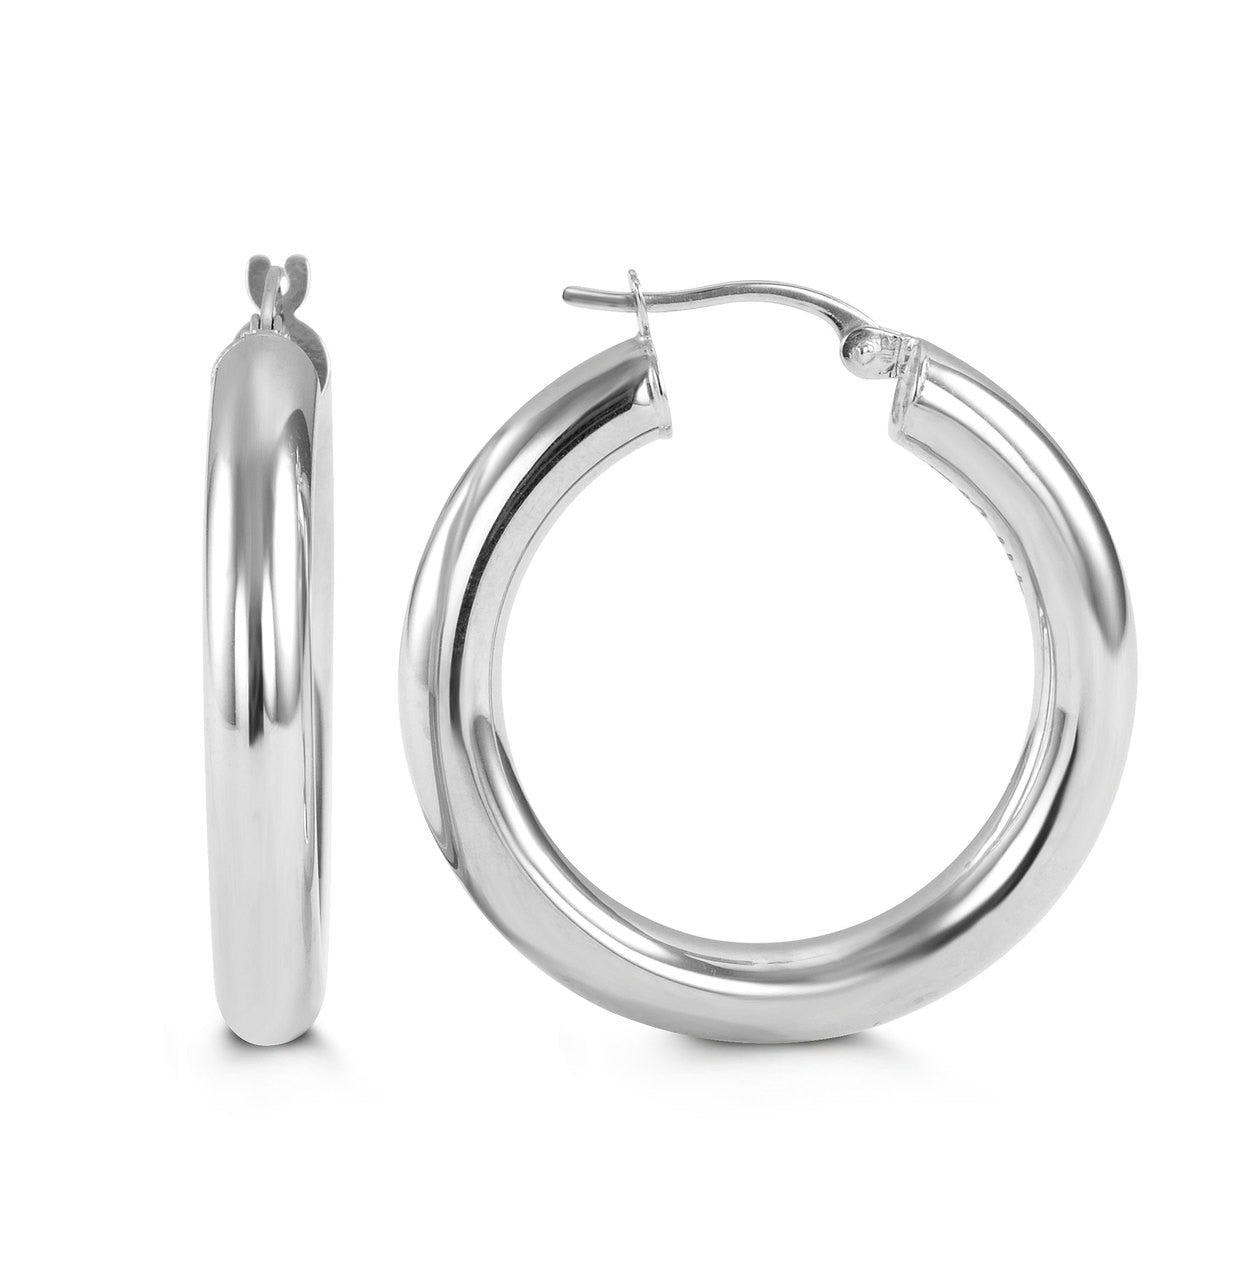 29mm White Gold Classic Hoops